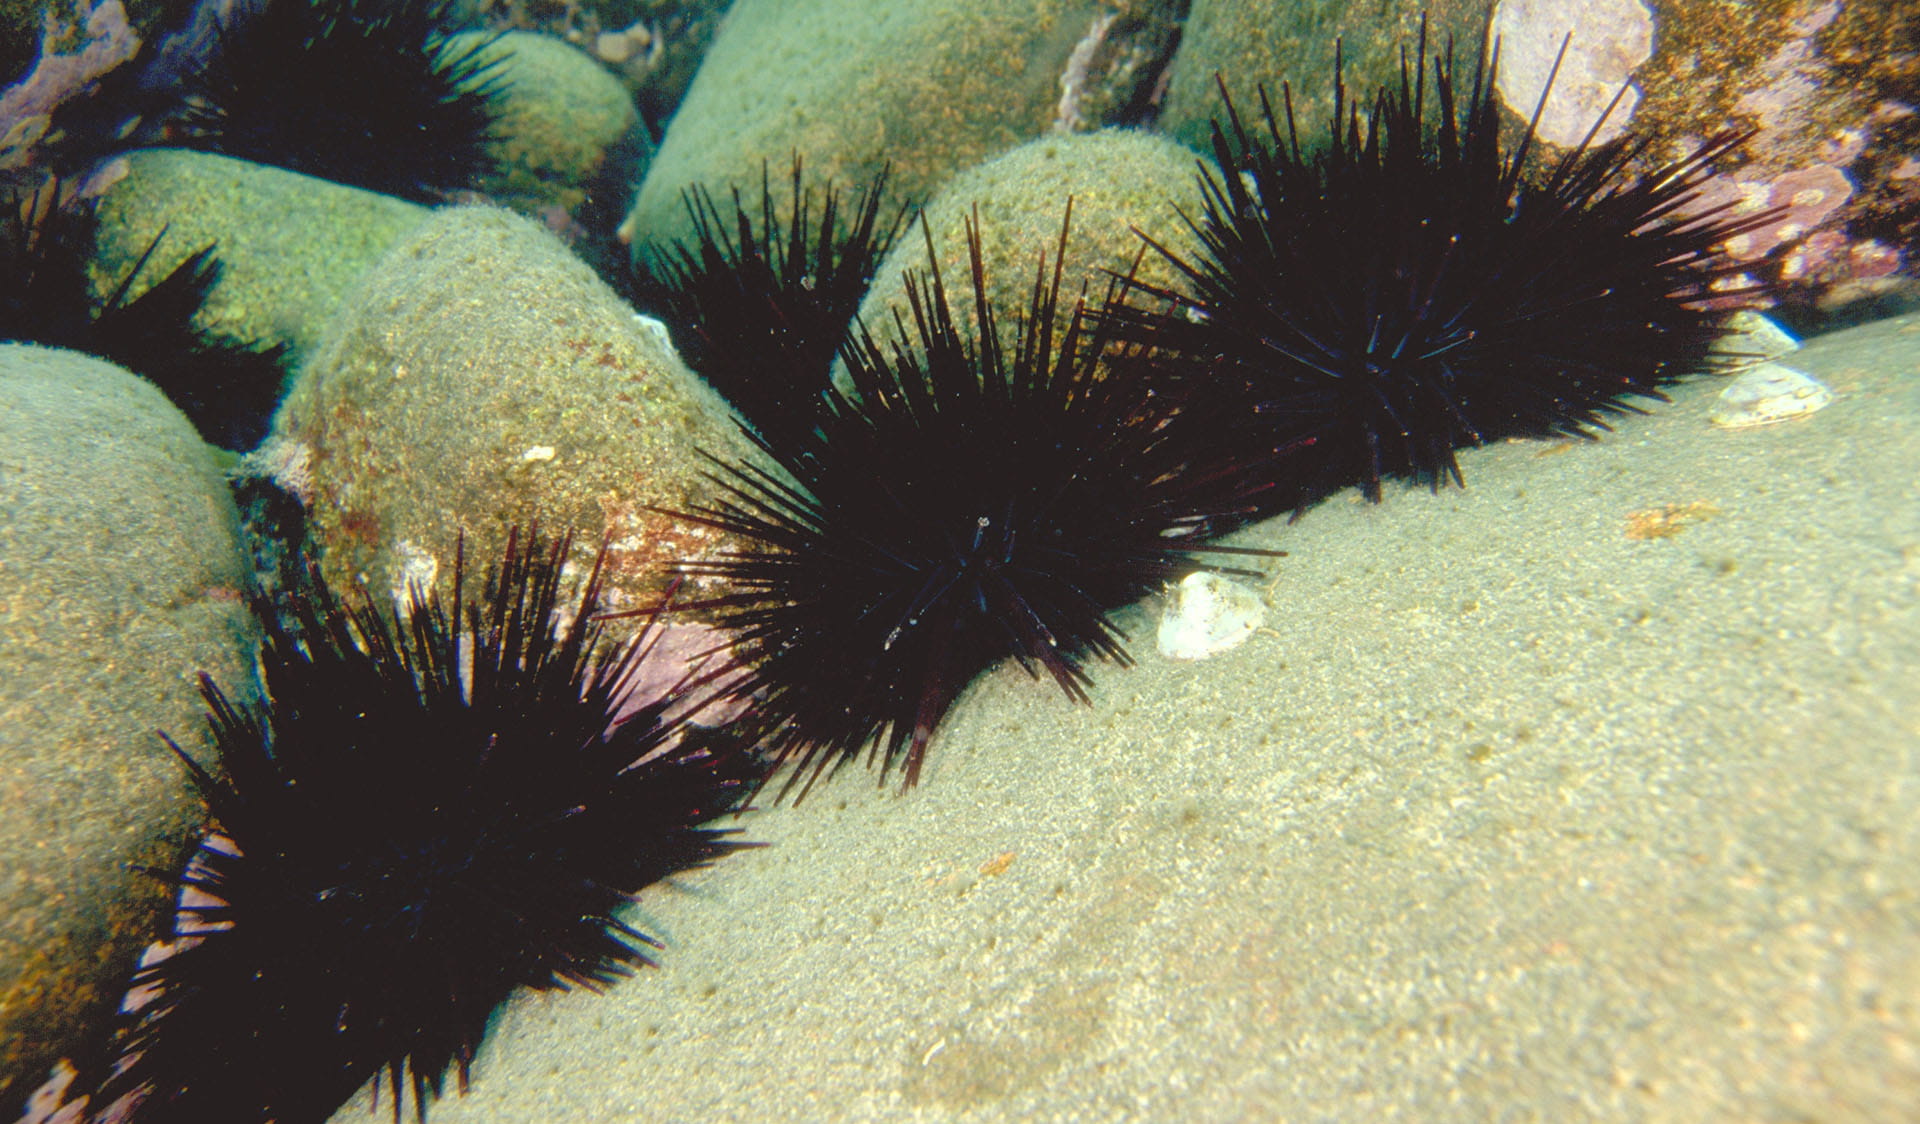 Underwater view of a group of sea urchins on rocks